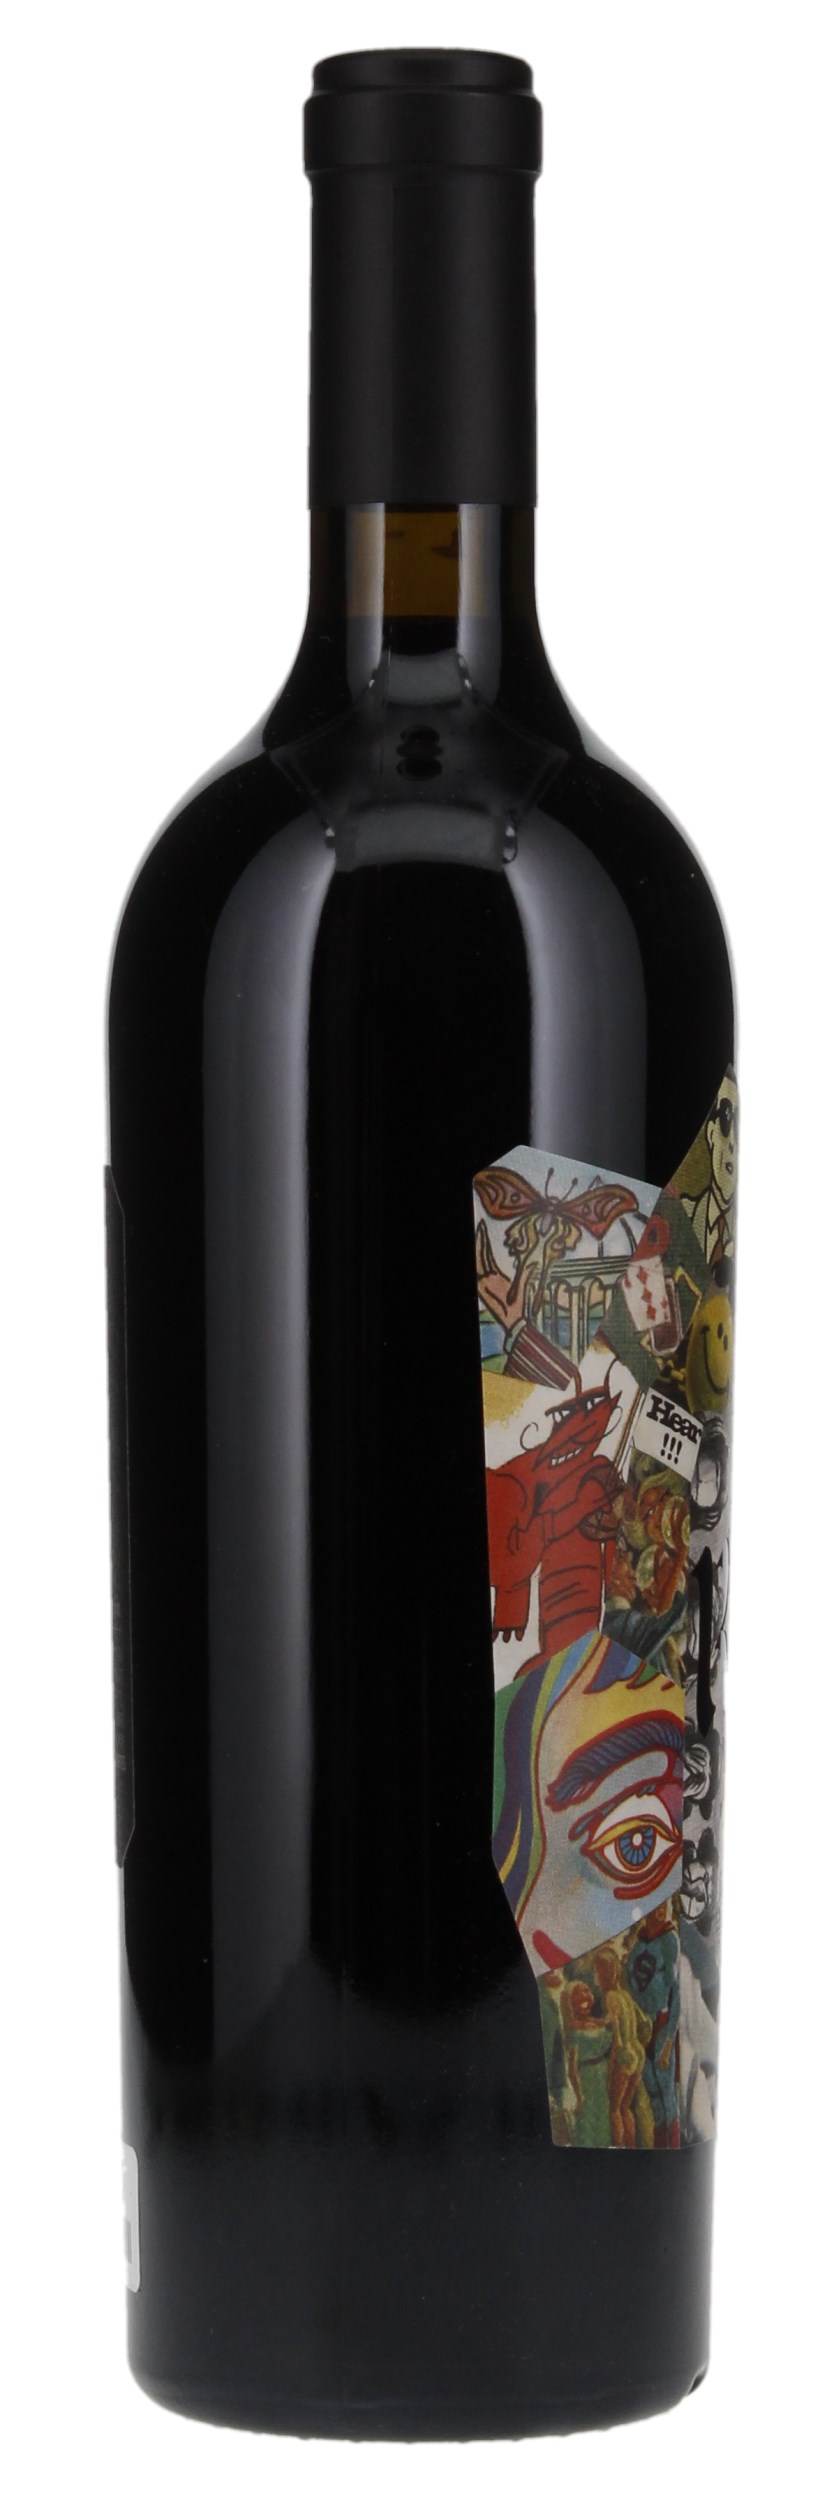 2014 Realm The Absurd, 750ml